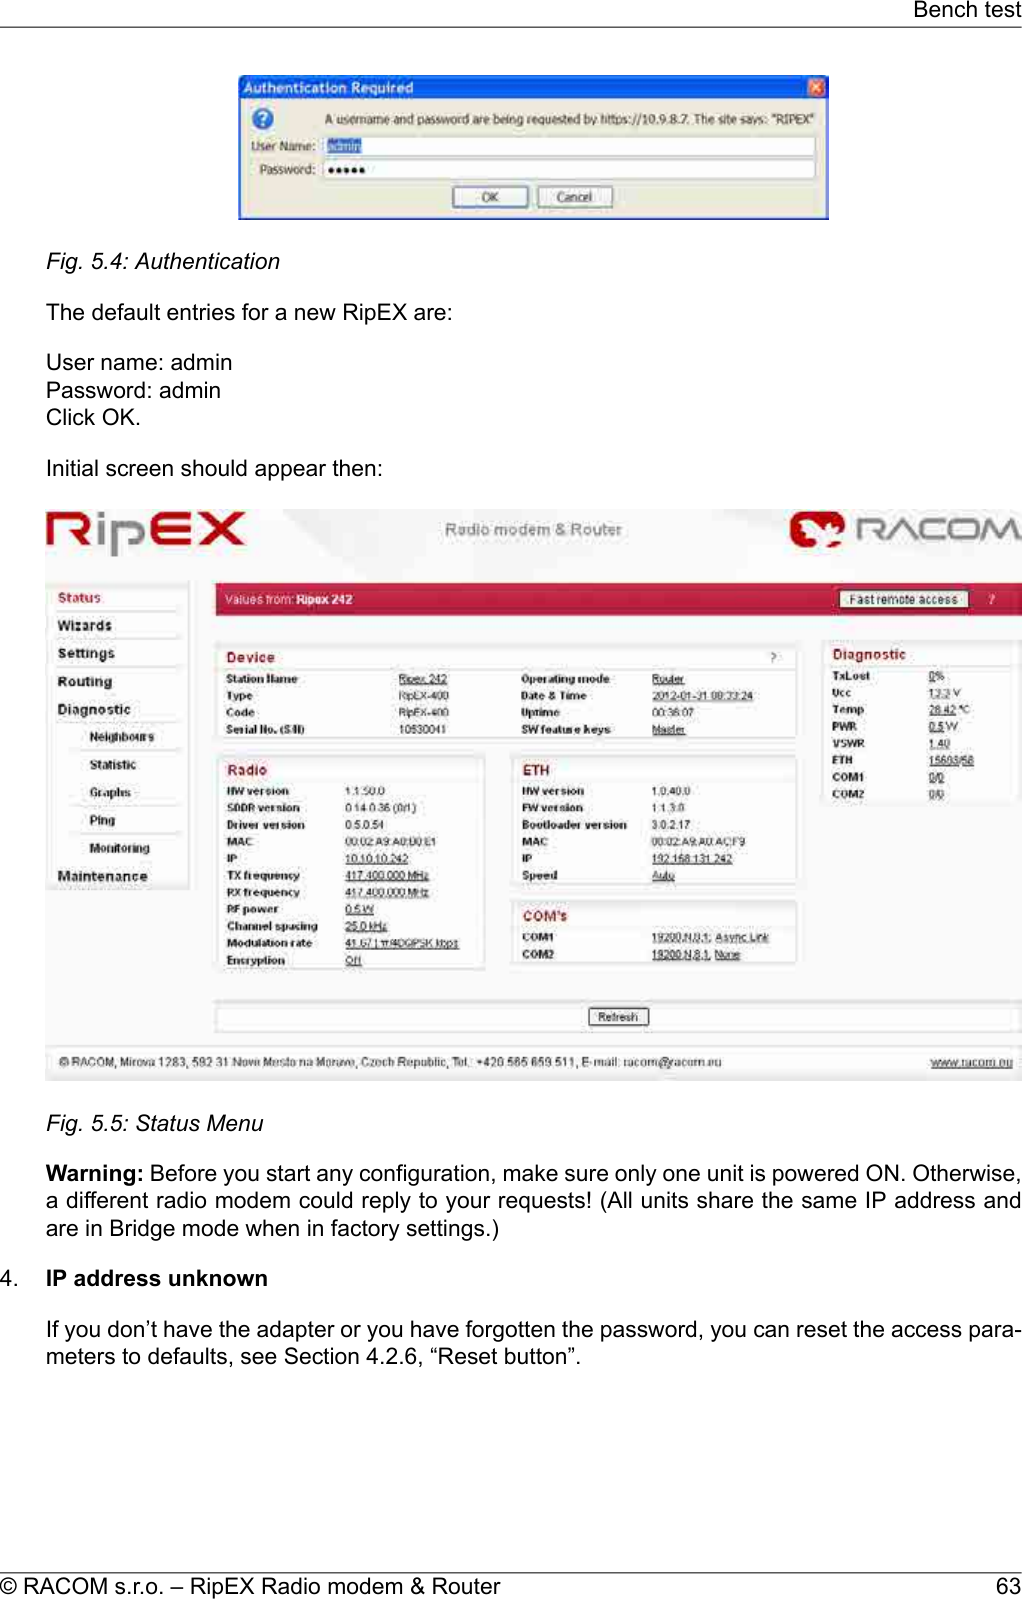 Fig. 5.4: AuthenticationThe default entries for a new RipEX are:User name: adminPassword: adminClick OK.Initial screen should appear then:Fig. 5.5: Status MenuWarning: Before you start any configuration, make sure only one unit is powered ON. Otherwise,a different radio modem could reply to your requests! (All units share the same IP address andare in Bridge mode when in factory settings.)4. IP address unknownIf you don’t have the adapter or you have forgotten the password, you can reset the access para-meters to defaults, see Section 4.2.6, “Reset button”.63© RACOM s.r.o. – RipEX Radio modem &amp; RouterBench test